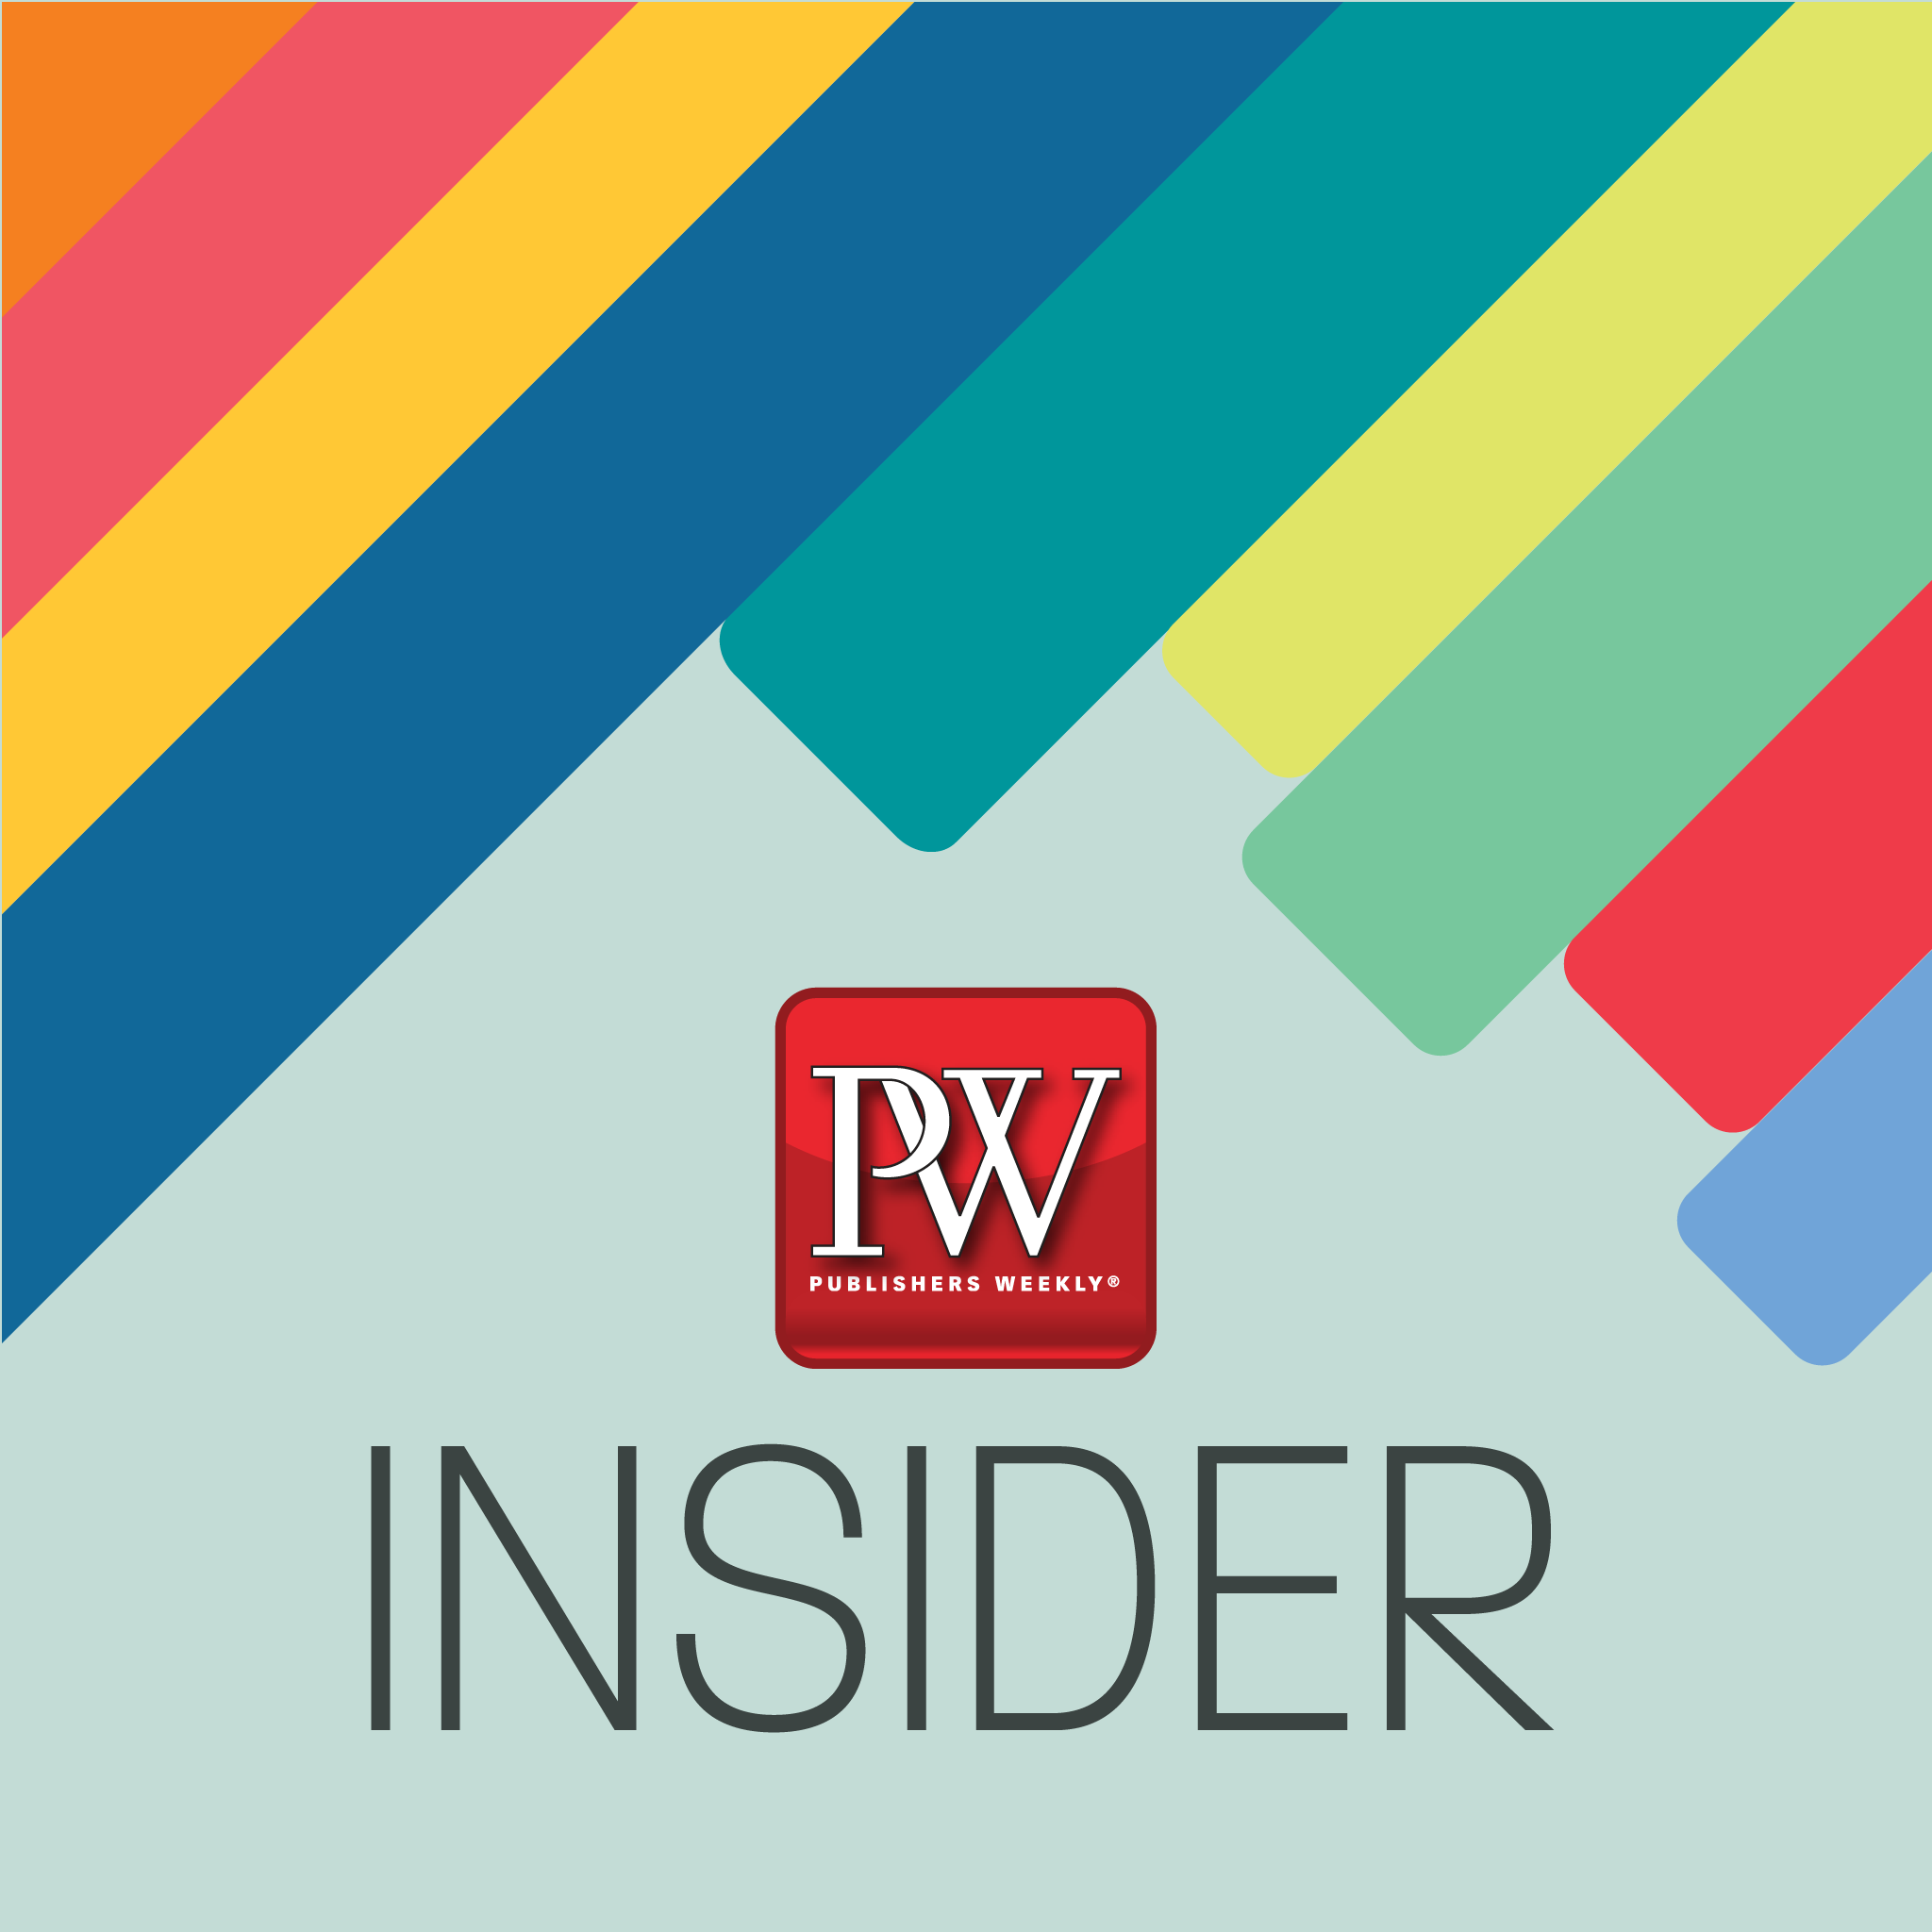 PW Insider 13: The Top Library Stories of 2018